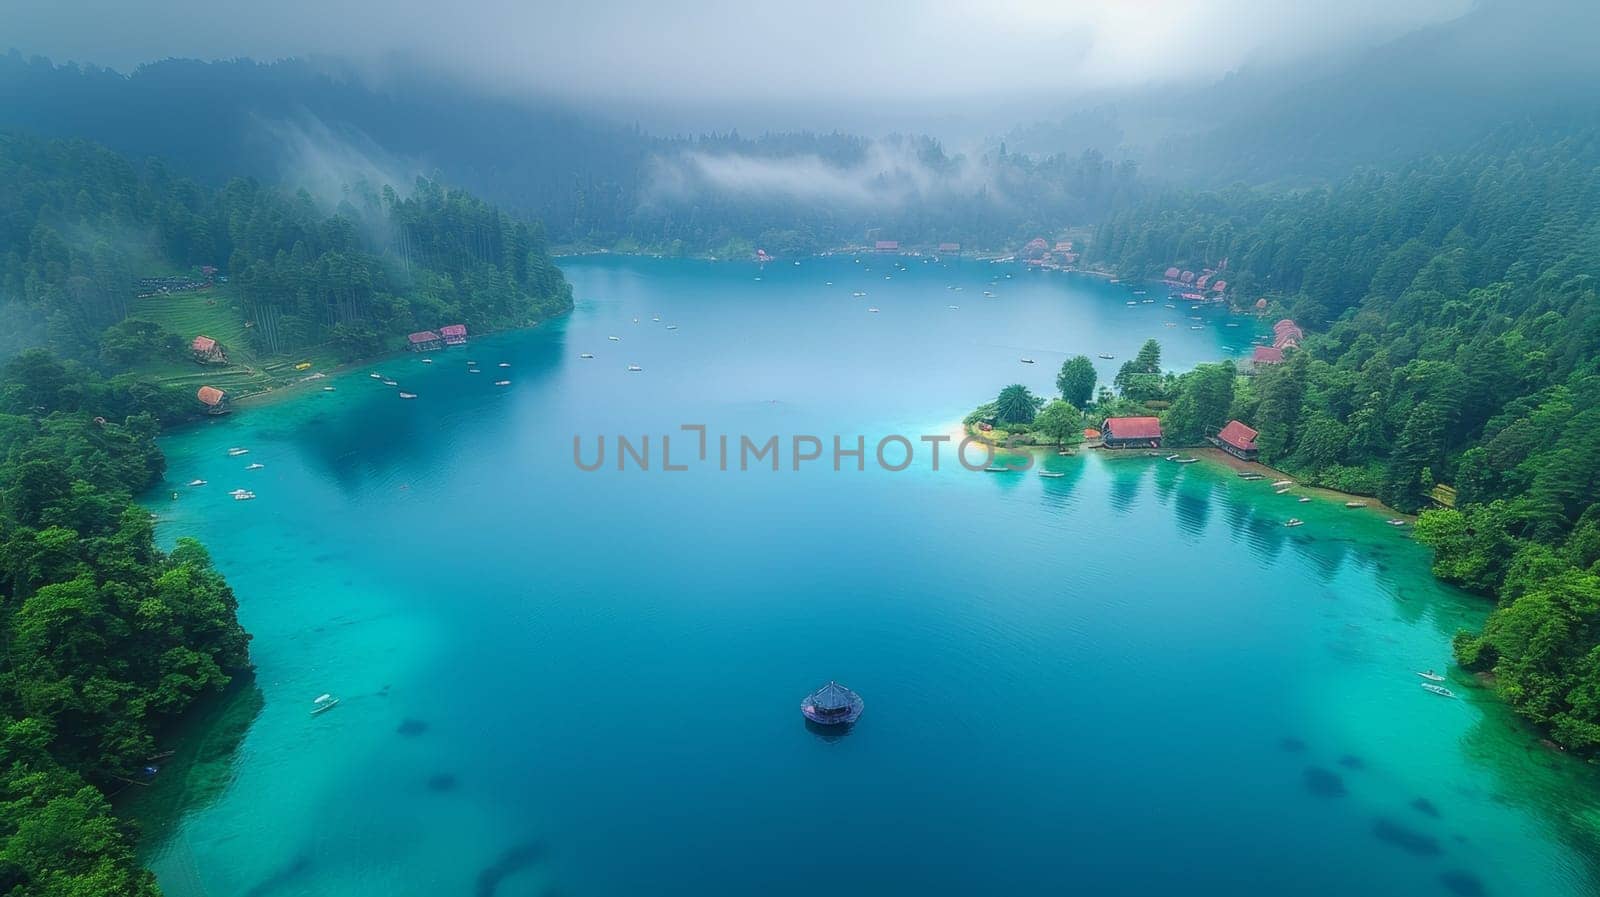 A boat is floating in a lake surrounded by trees